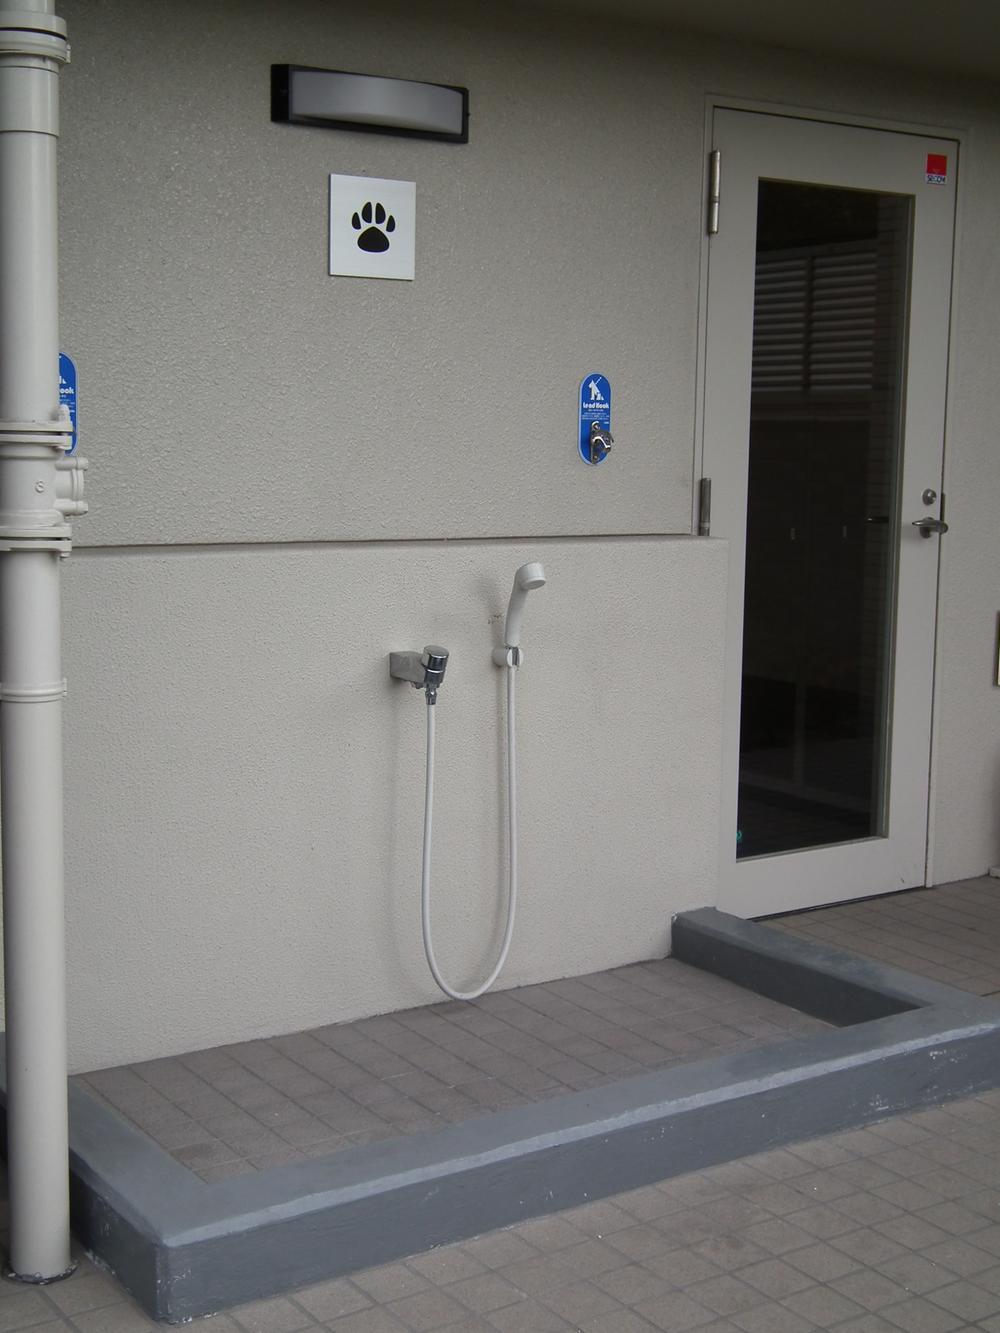 Other common areas. Pets for foot-washing facilities